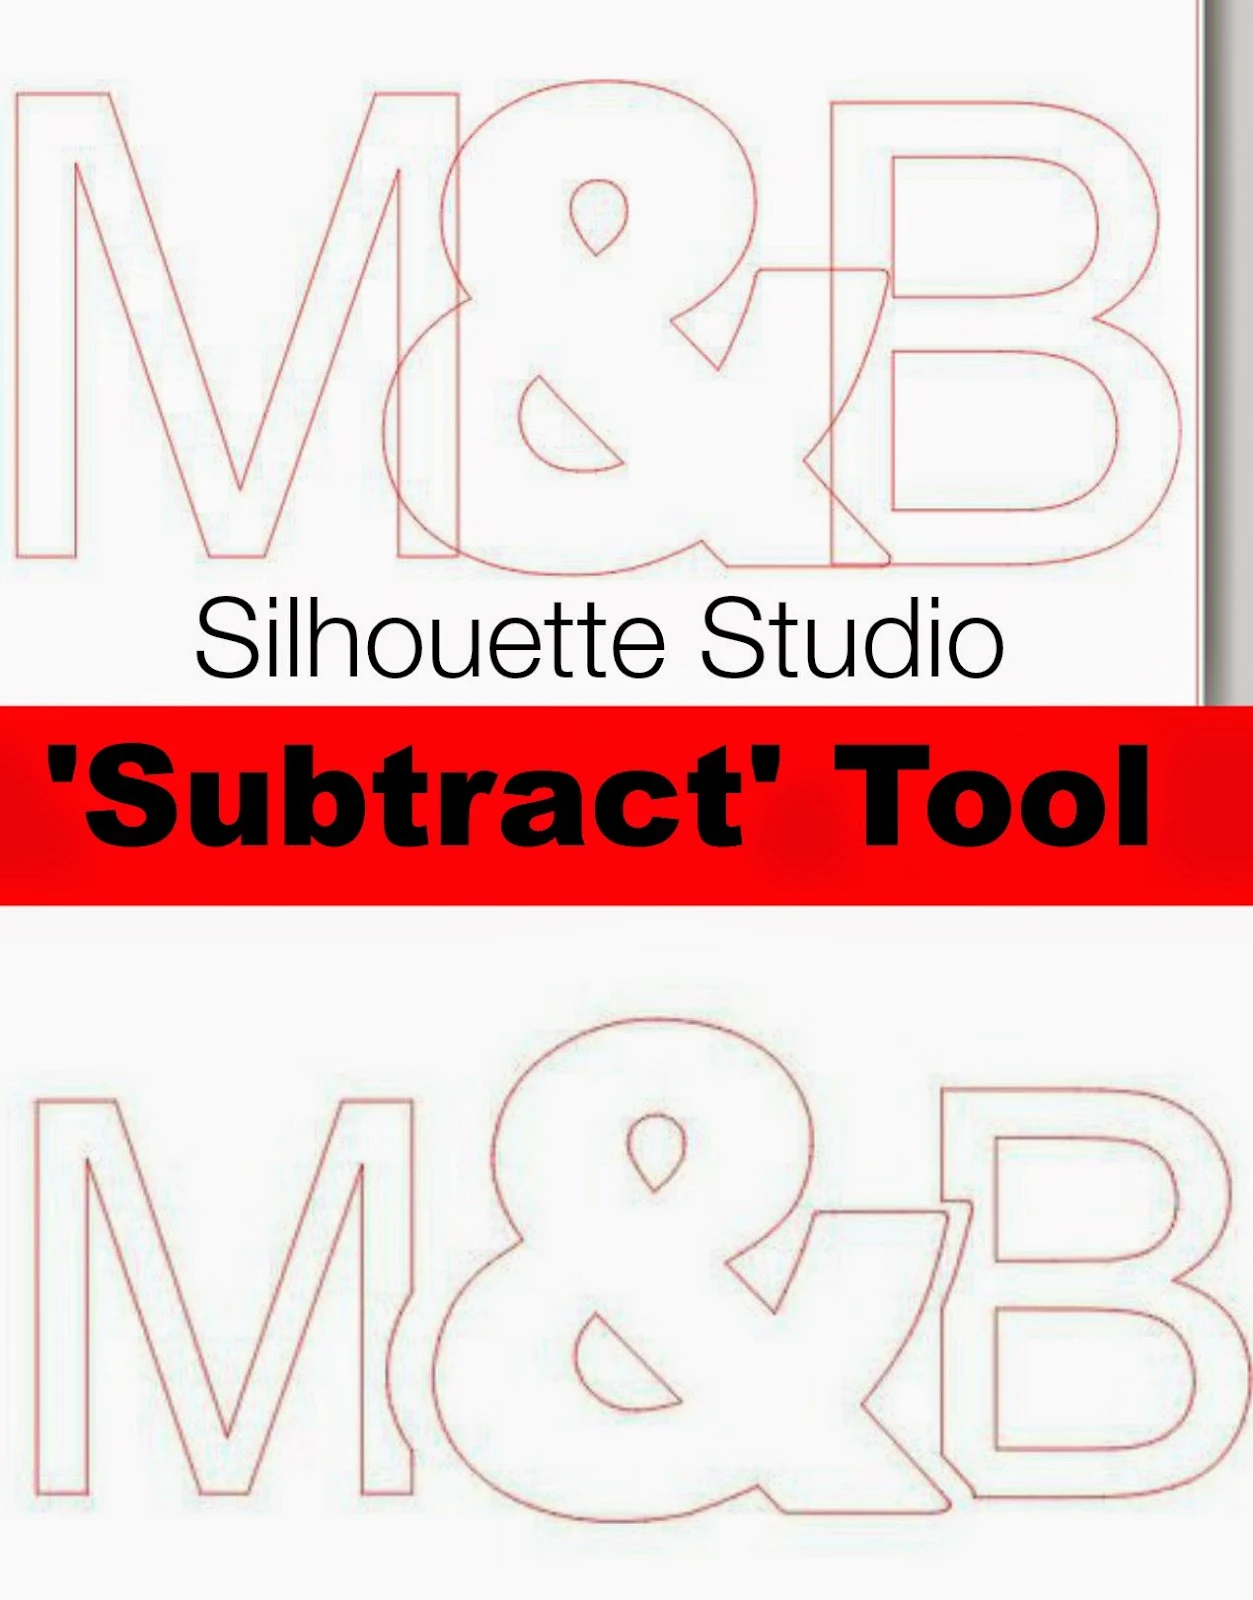 Subtract, subtract all, Silhouette tutorial, Silhouette Studio, subtract tool